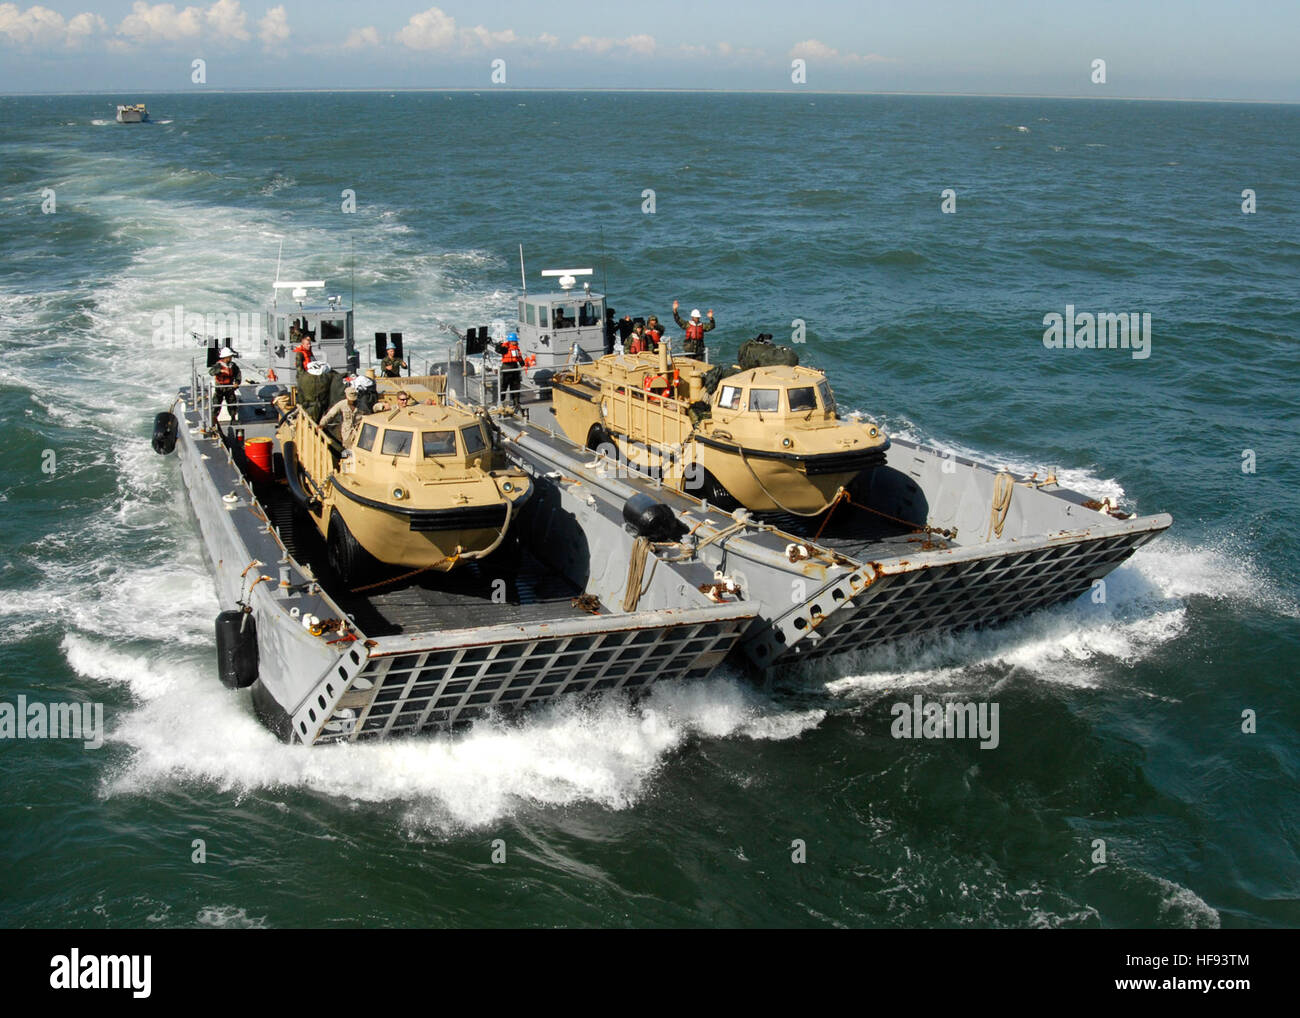 Two landing craft mechanized (LCM) vessels carry vehicles to the amphibious dock landing ship USS Fort McHenry (LSD 43) before the ship?s departure from Moorehead City, N.C., March 13, 2010. Fort McHenry has returned stateside after participating in Operation Unified Response, a multinational effort to assist Haitians affected by the 7.0-magintude earthquake that struck Haiti Jan. 12, 2010. (DoD photo by Mass Communication Specialist 1st Class Darryl I. Wood, U.S. Navy/Released) 100313-N-9301W-084 (4438755918) Stock Photo